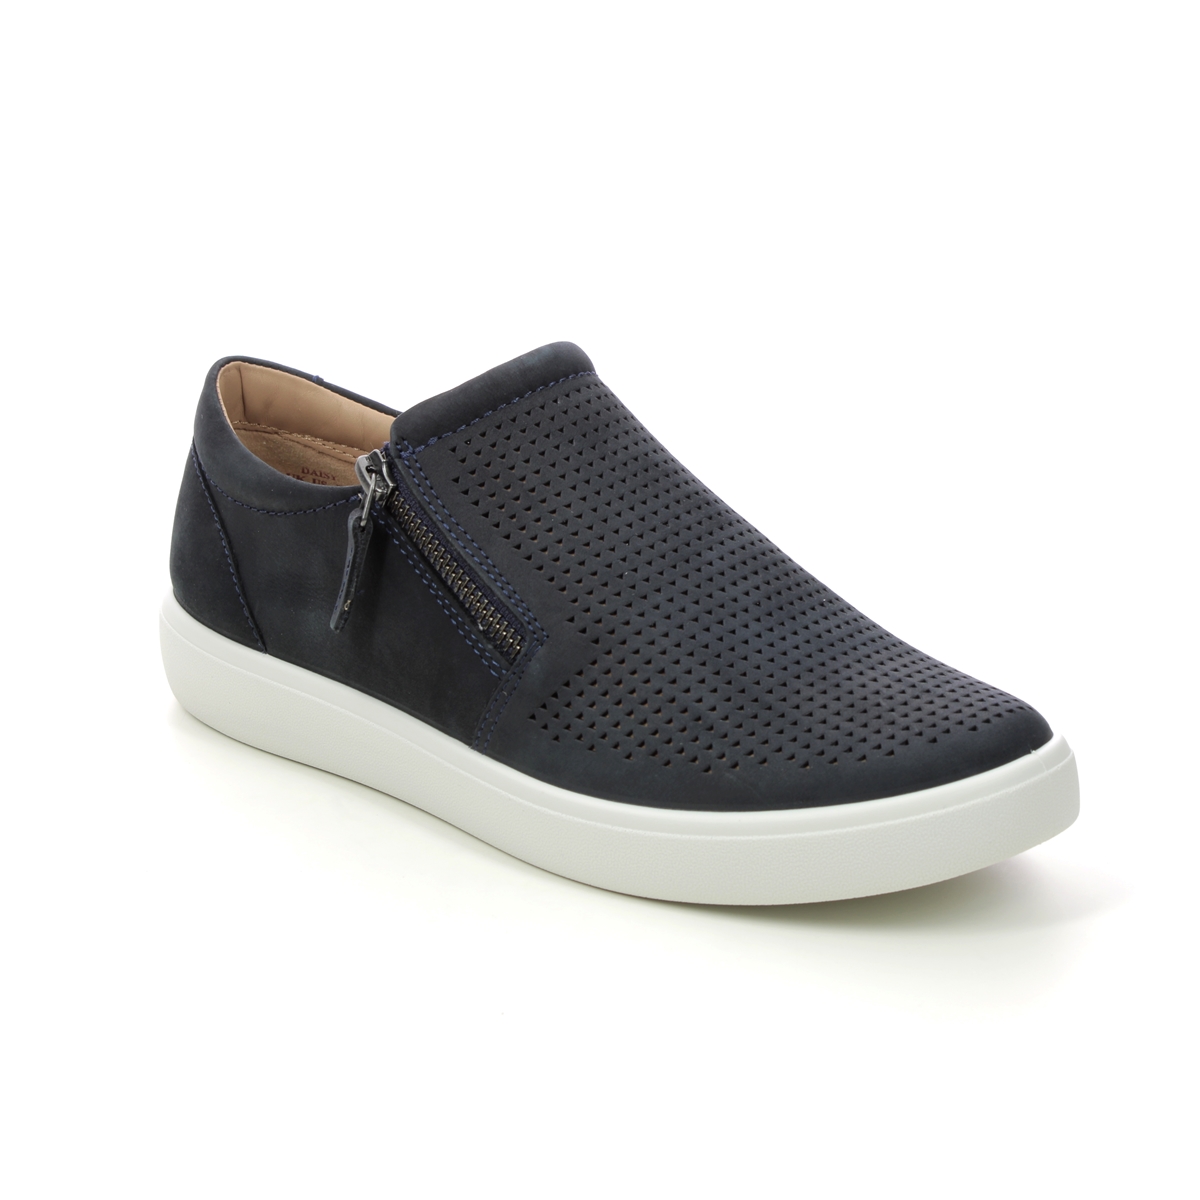 Hotter Daisy Wide Navy nubuck Womens Comfort Slip On Shoes 16215-73 in a Plain  in Size 4.5